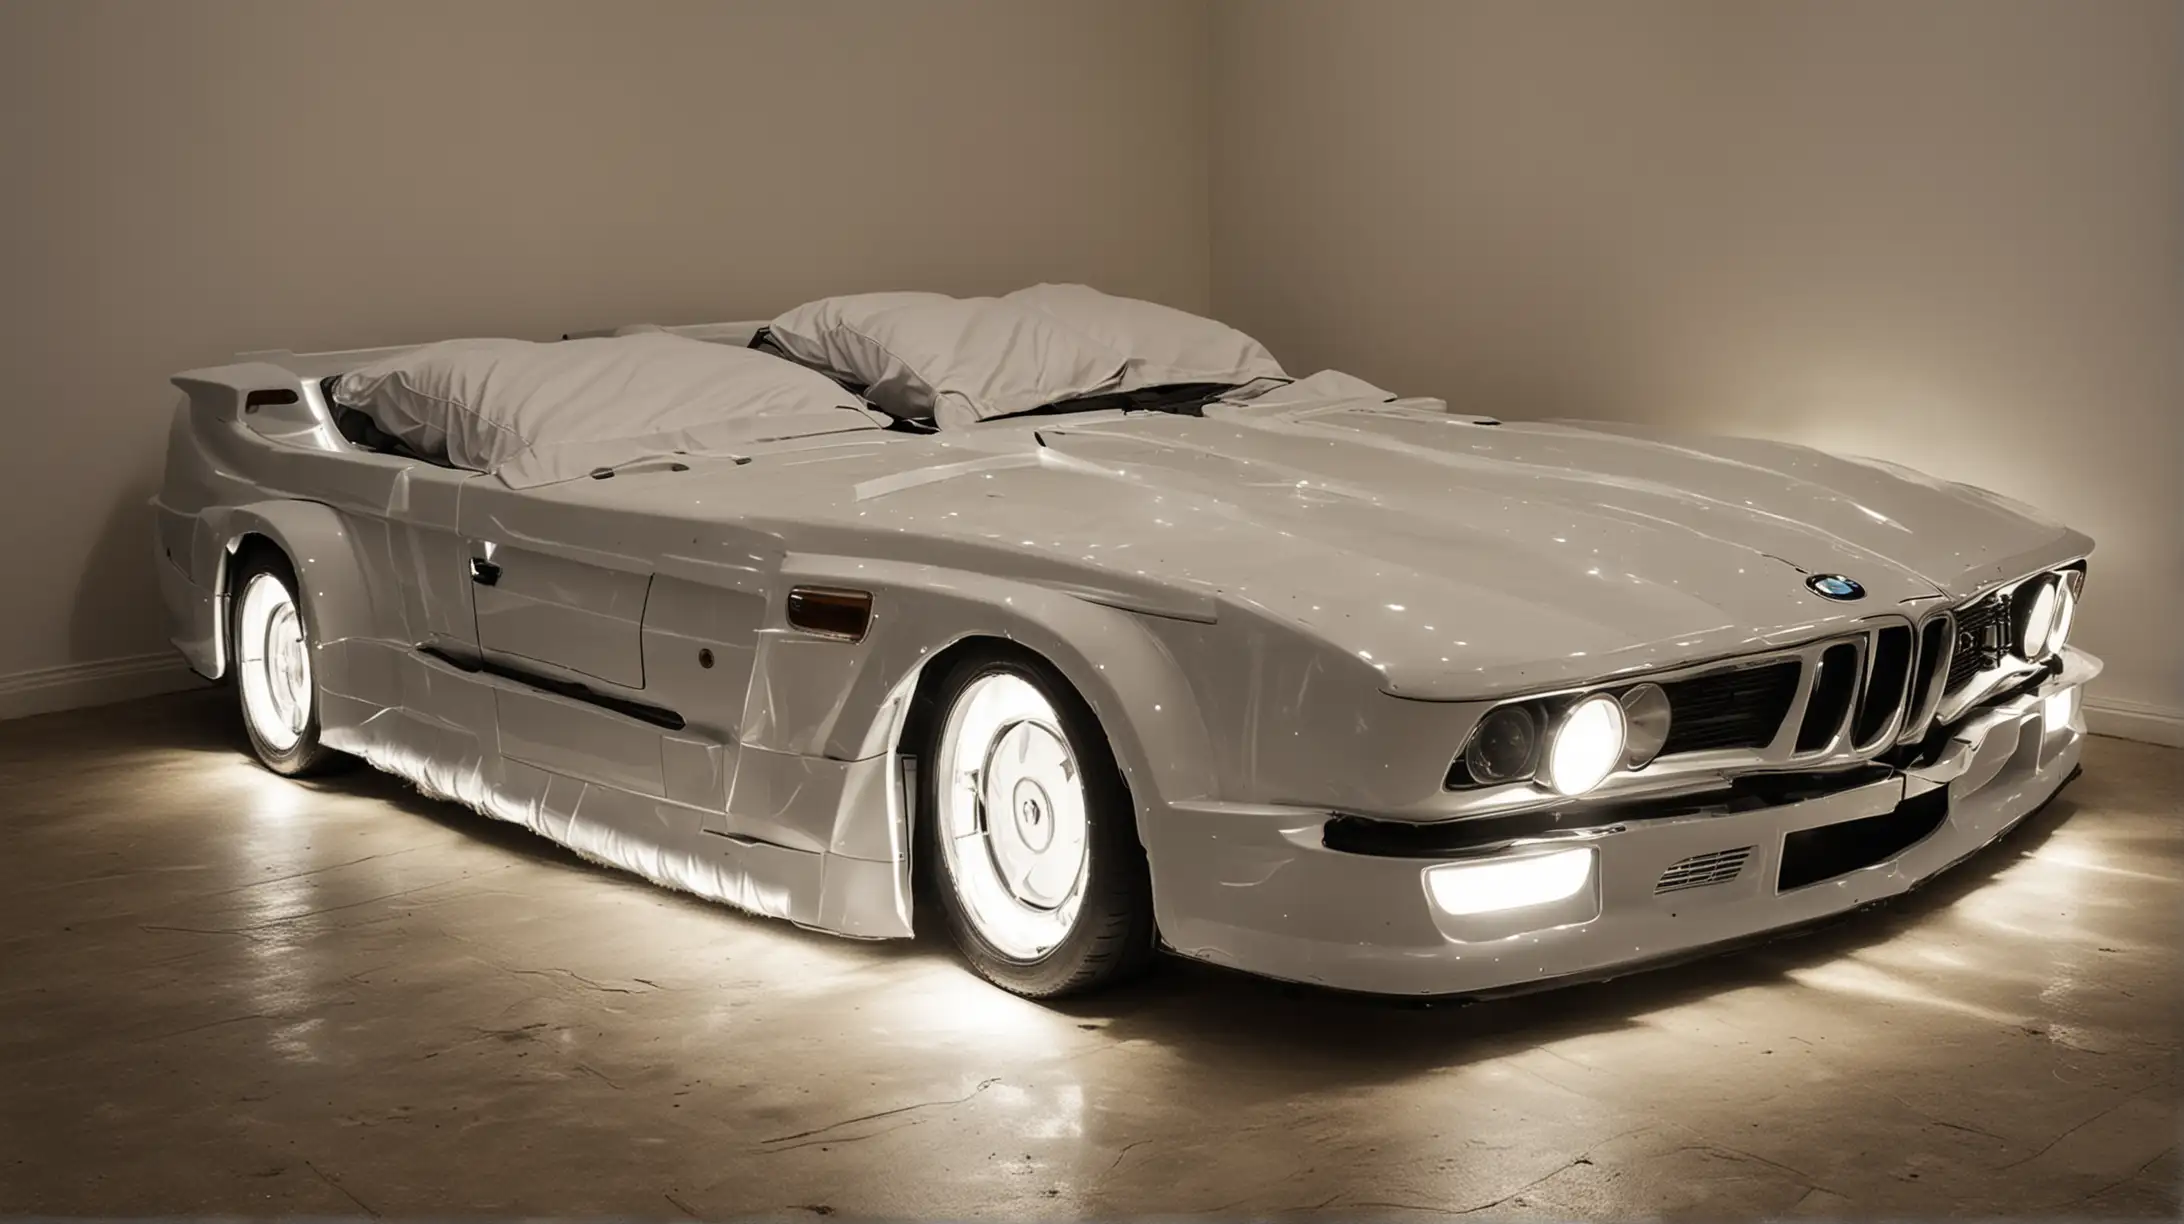 BMW Car Bed with Headlights On